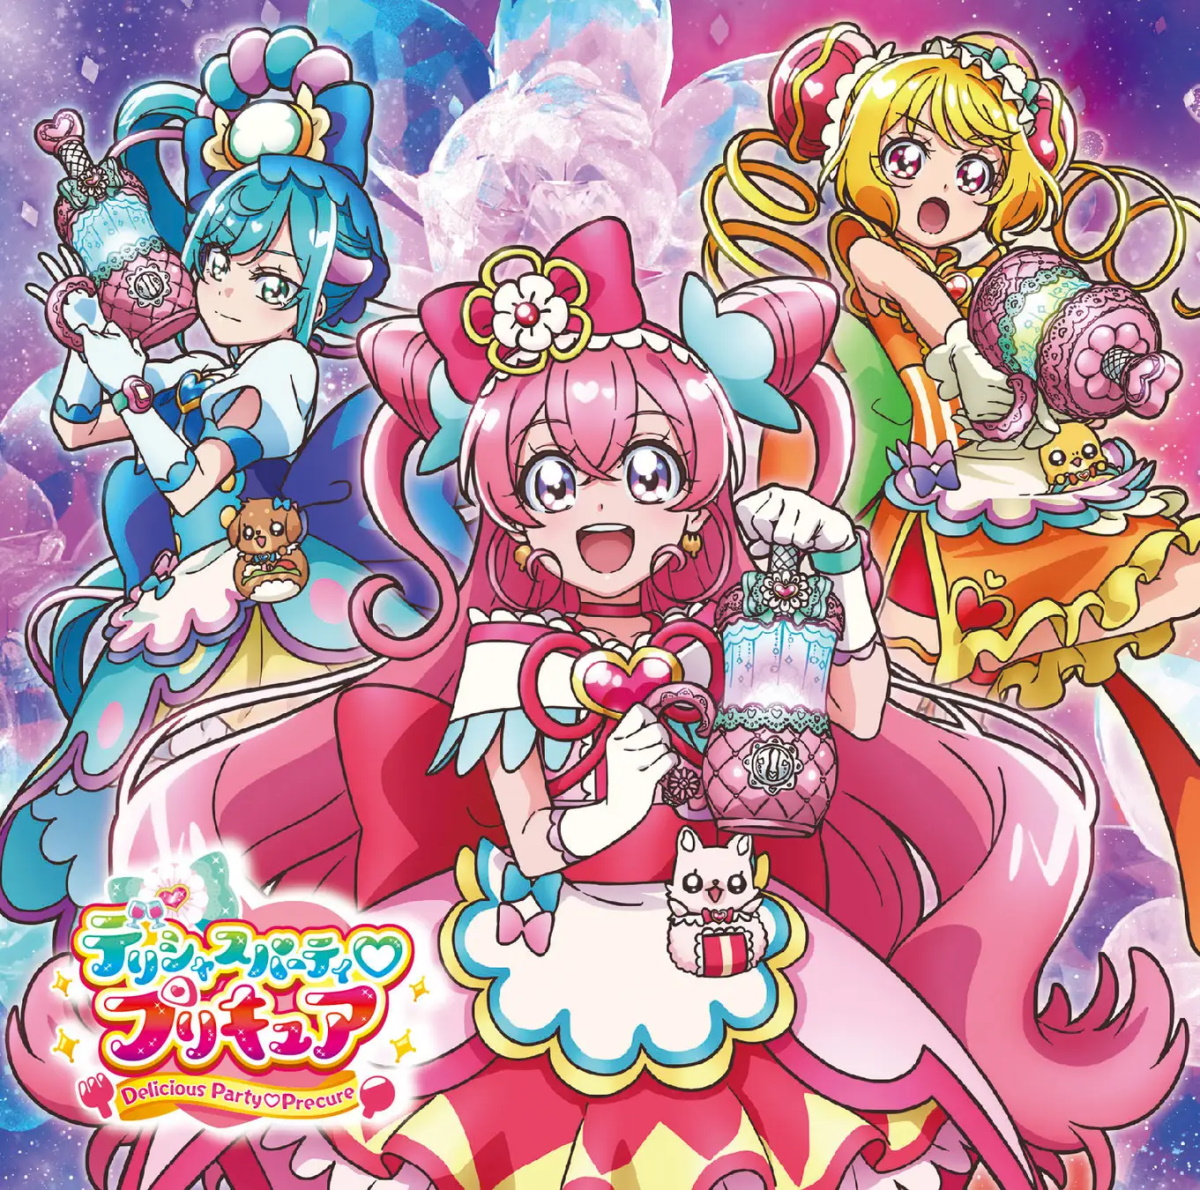 Cover for『Machico - Cheers! Delicious Party♡Pretty Cure』from the release『Delicious Party♡Pretty Cure Theme Song Single』